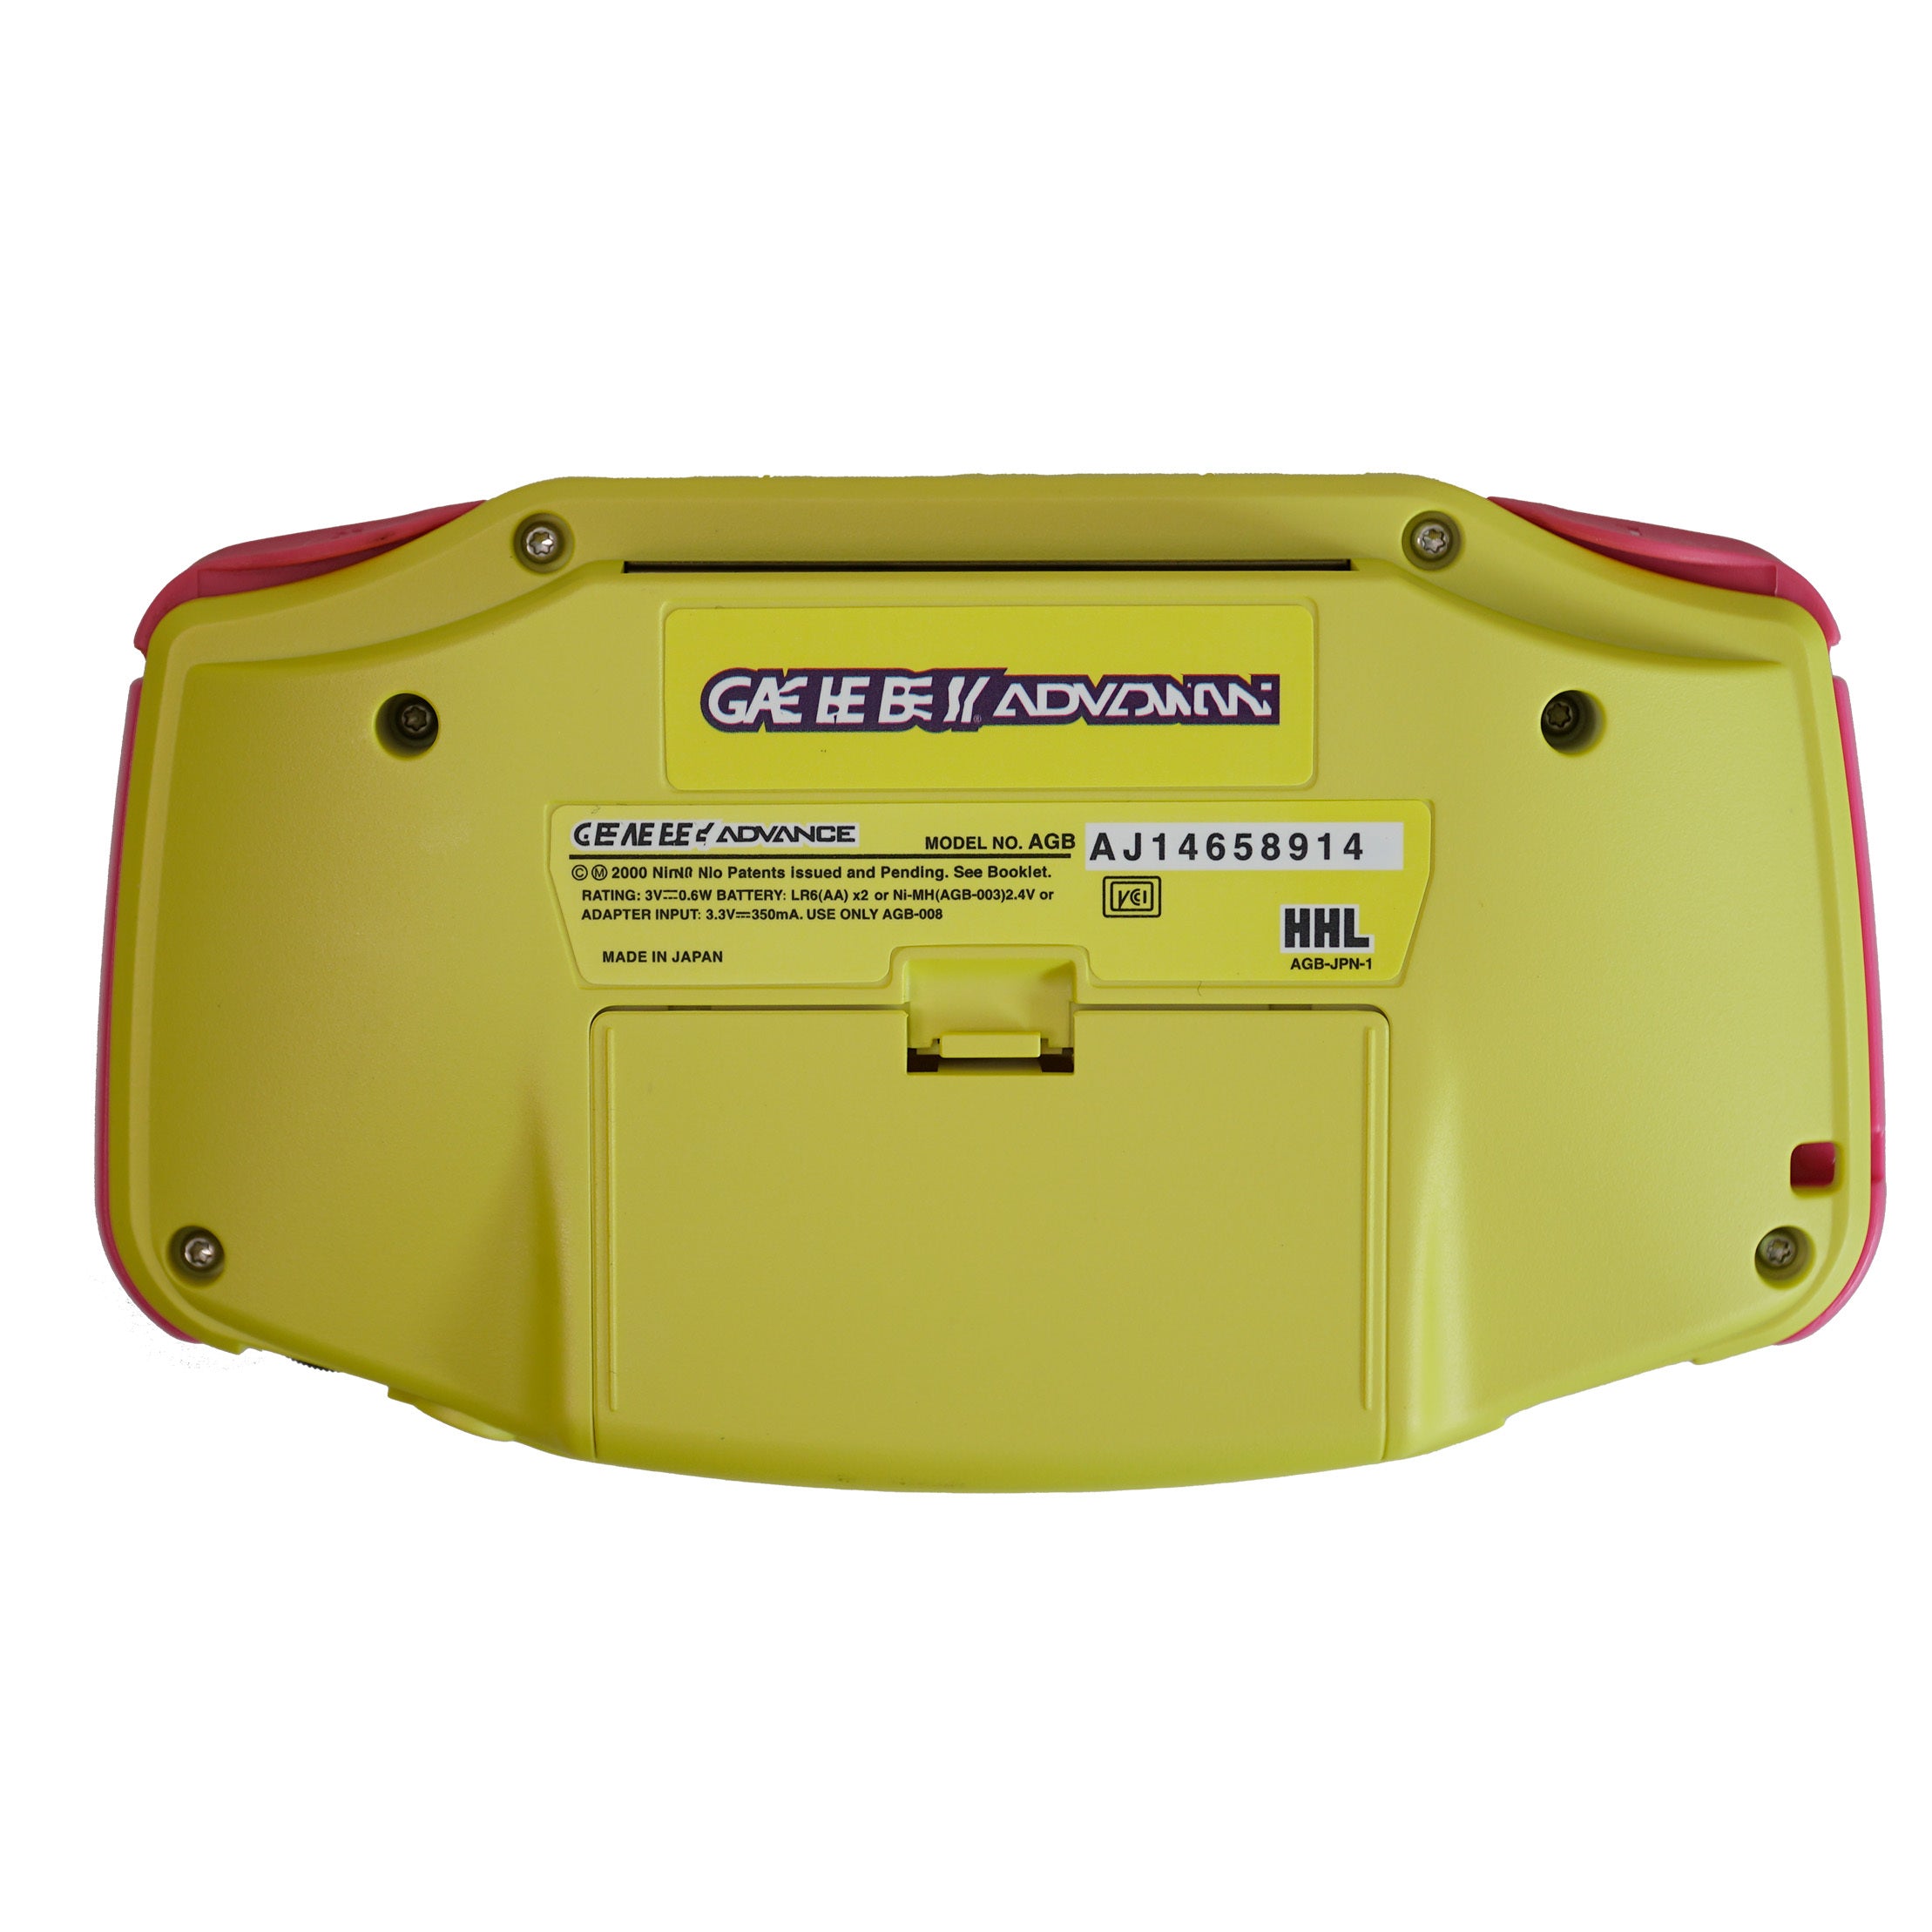 Made to Order Game Boy Advance Ultimate Console - Impala Yellow Skate | IPS UPGRADE ONLY Hand Held Legend